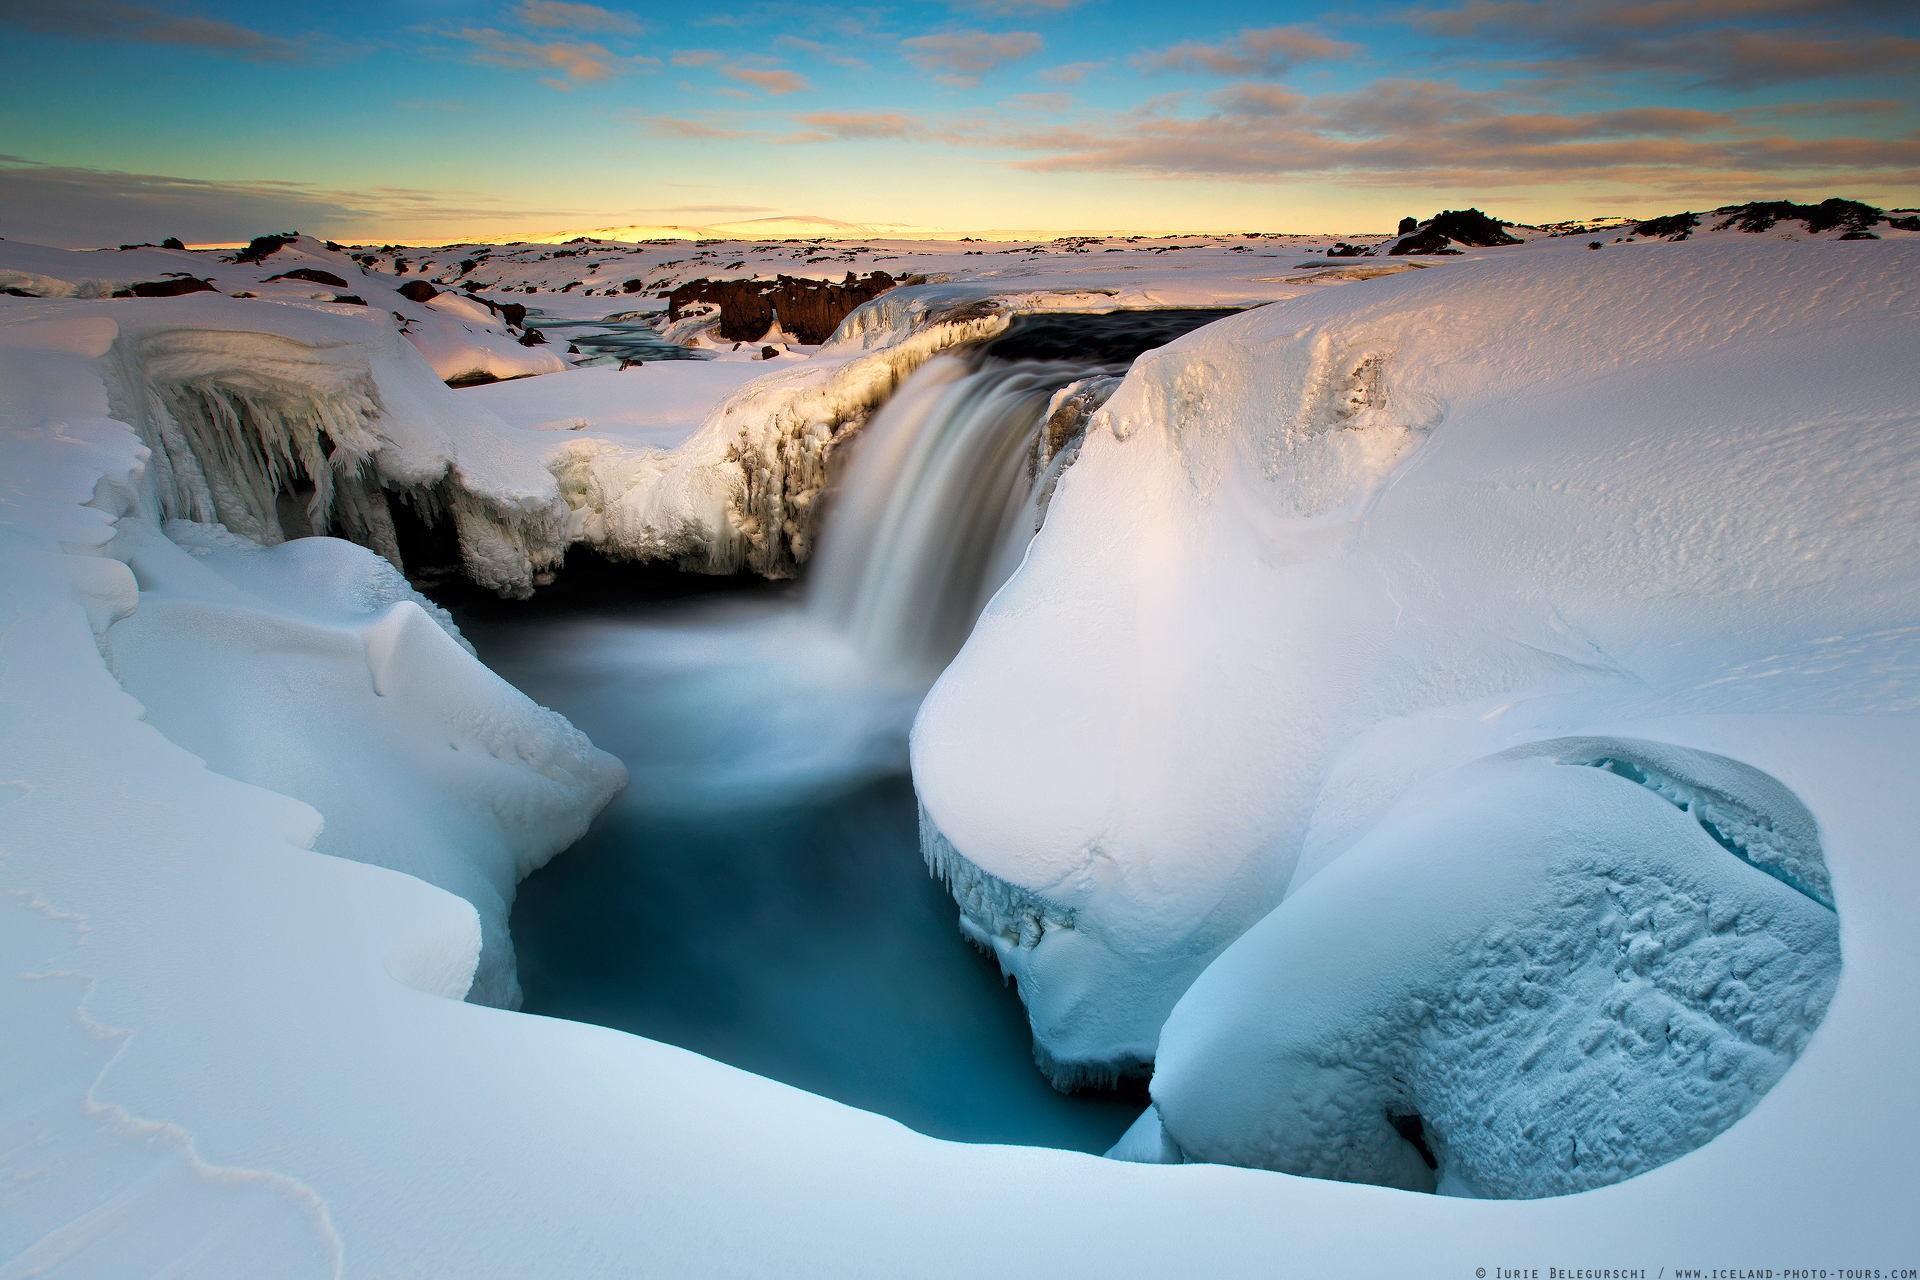 General 1920x1280 winter snow water ice landscape long exposure waterfall nature cold outdoors